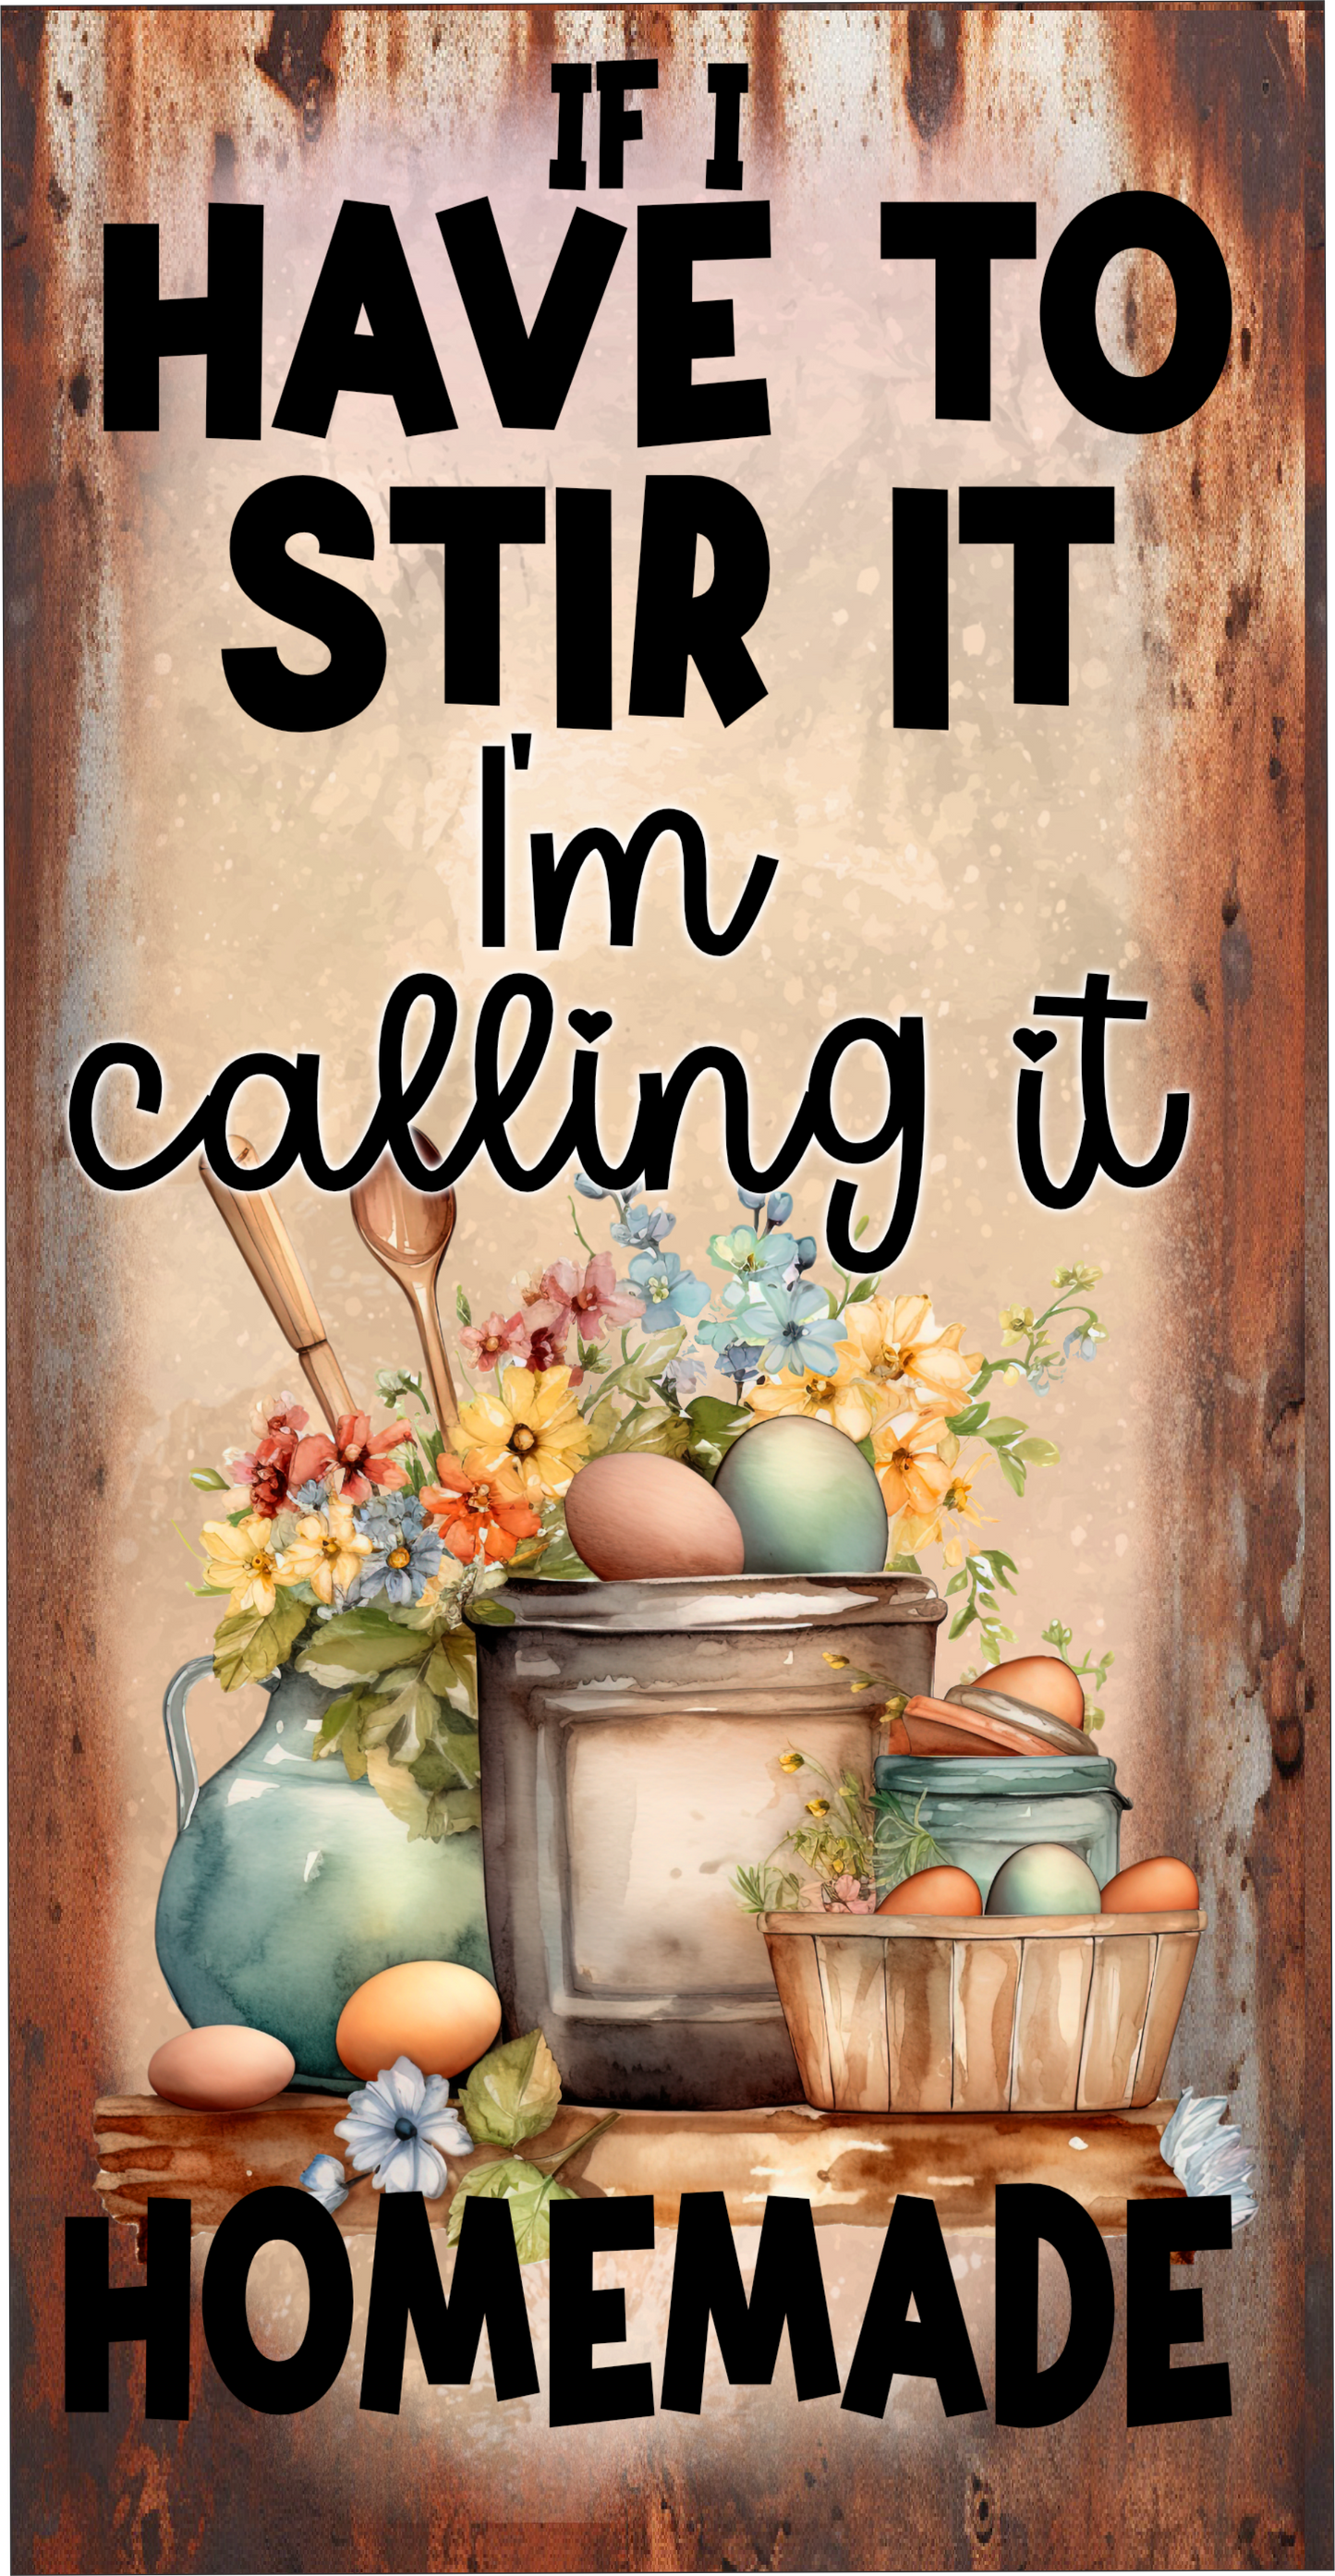 If i have to stir it it's homemade sign 6x12